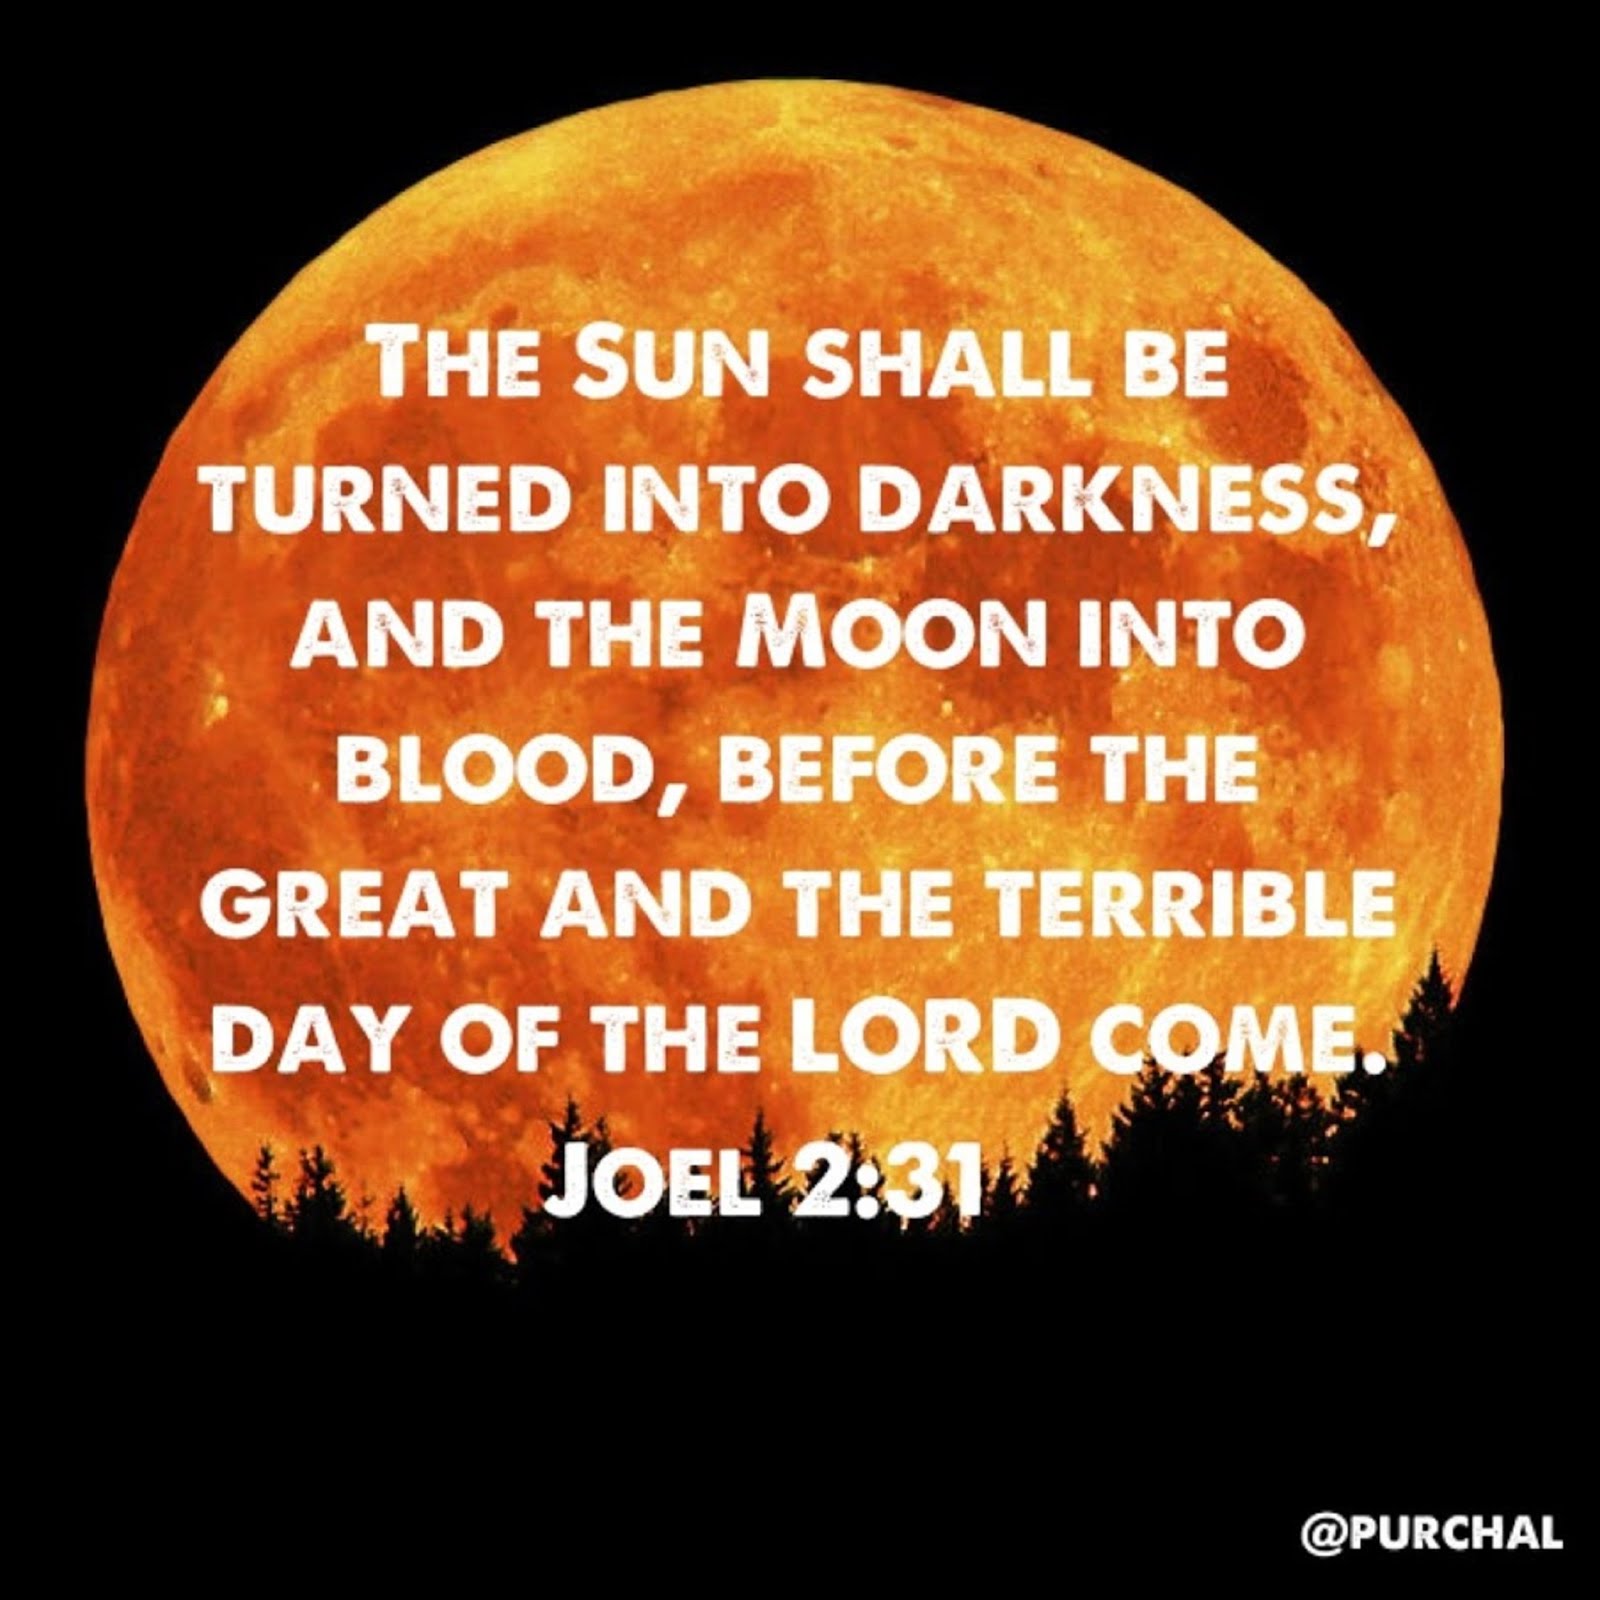 THE SUN WILL BE TURNED INTO DARKNESS AD THE MOON INTO BLOOD BEFORE THE GREAT AND TERRIBLE DAY OF